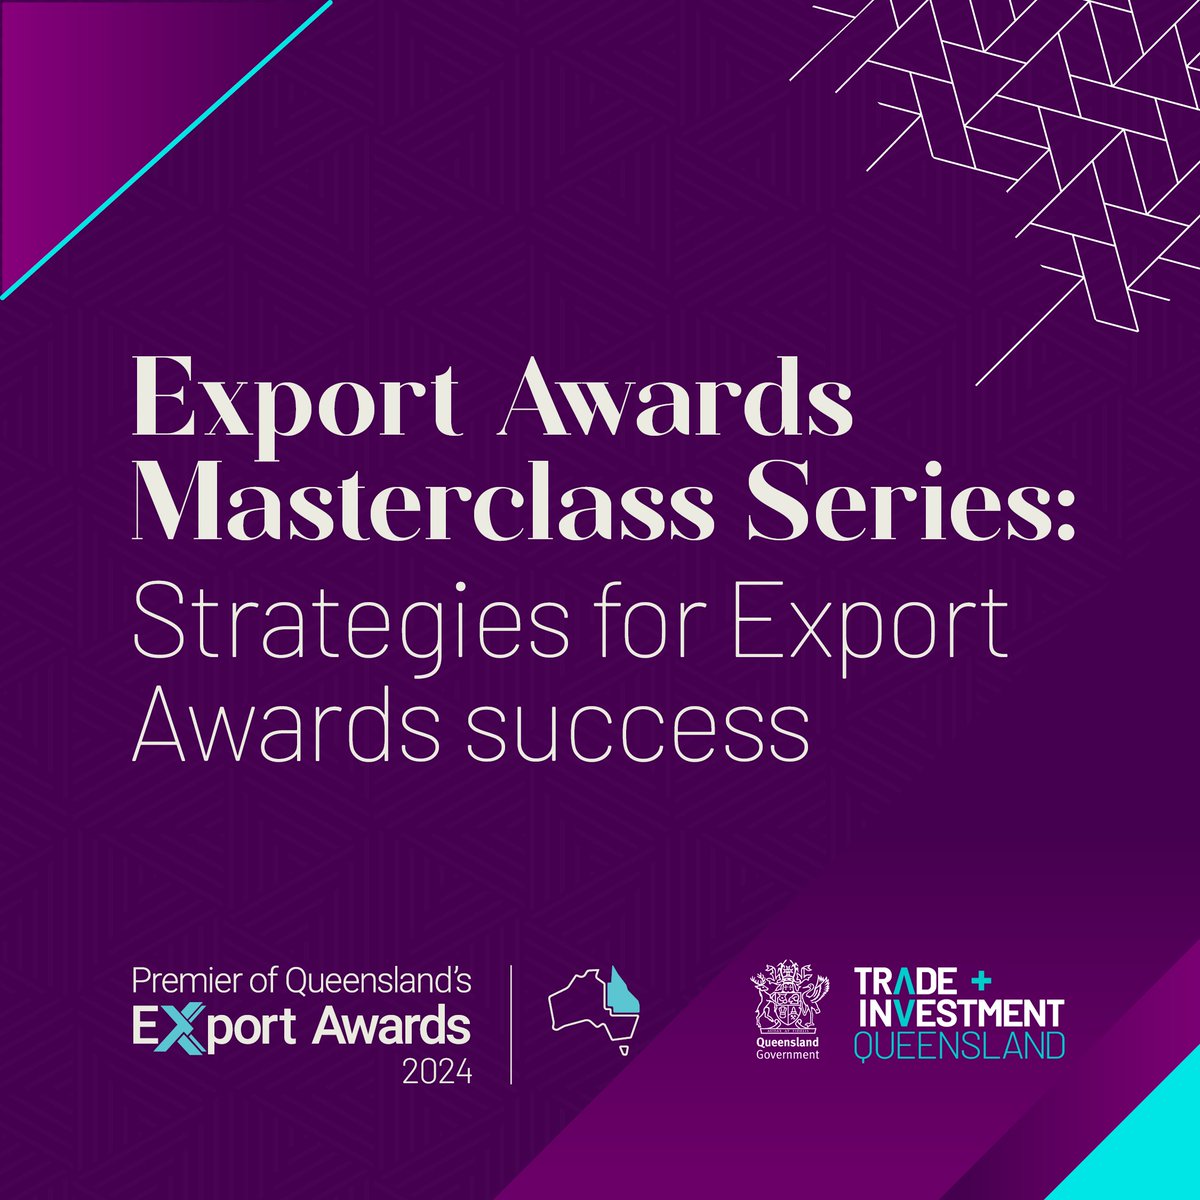 Applications for the Premier of Queensland's Export Awards 2024 are opening soon! Get the tools and knowledge you need for your application with our Strategies for Export Awards Success masterclass on 1 May bit.ly/4cXpS9r